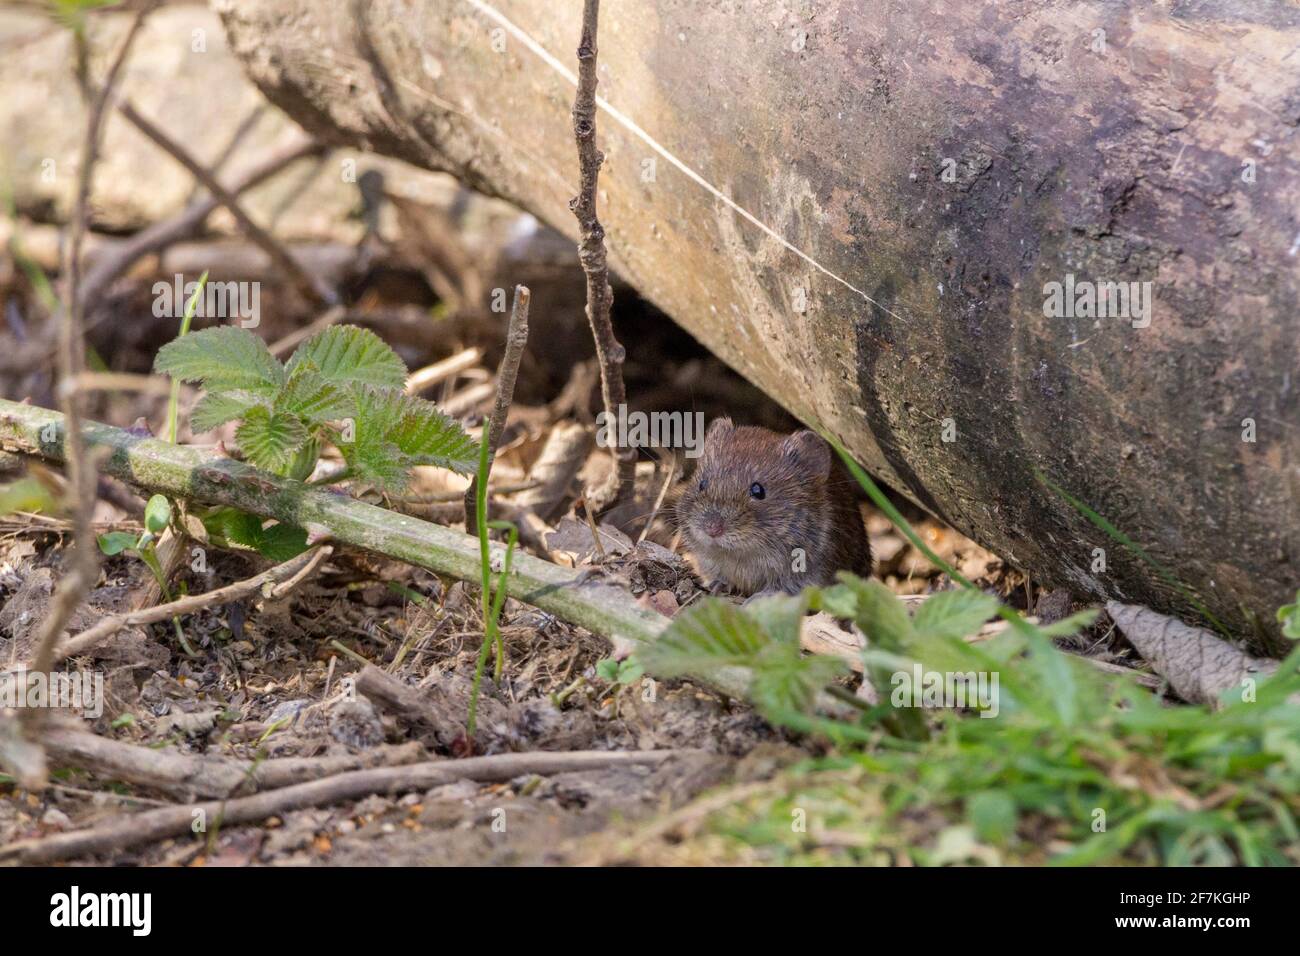 Bank vole Clethrionomys glareolus reddish brown fur short furry tail chubby appearance blunt nose small eyes and ears grey underside in bird hide Stock Photo